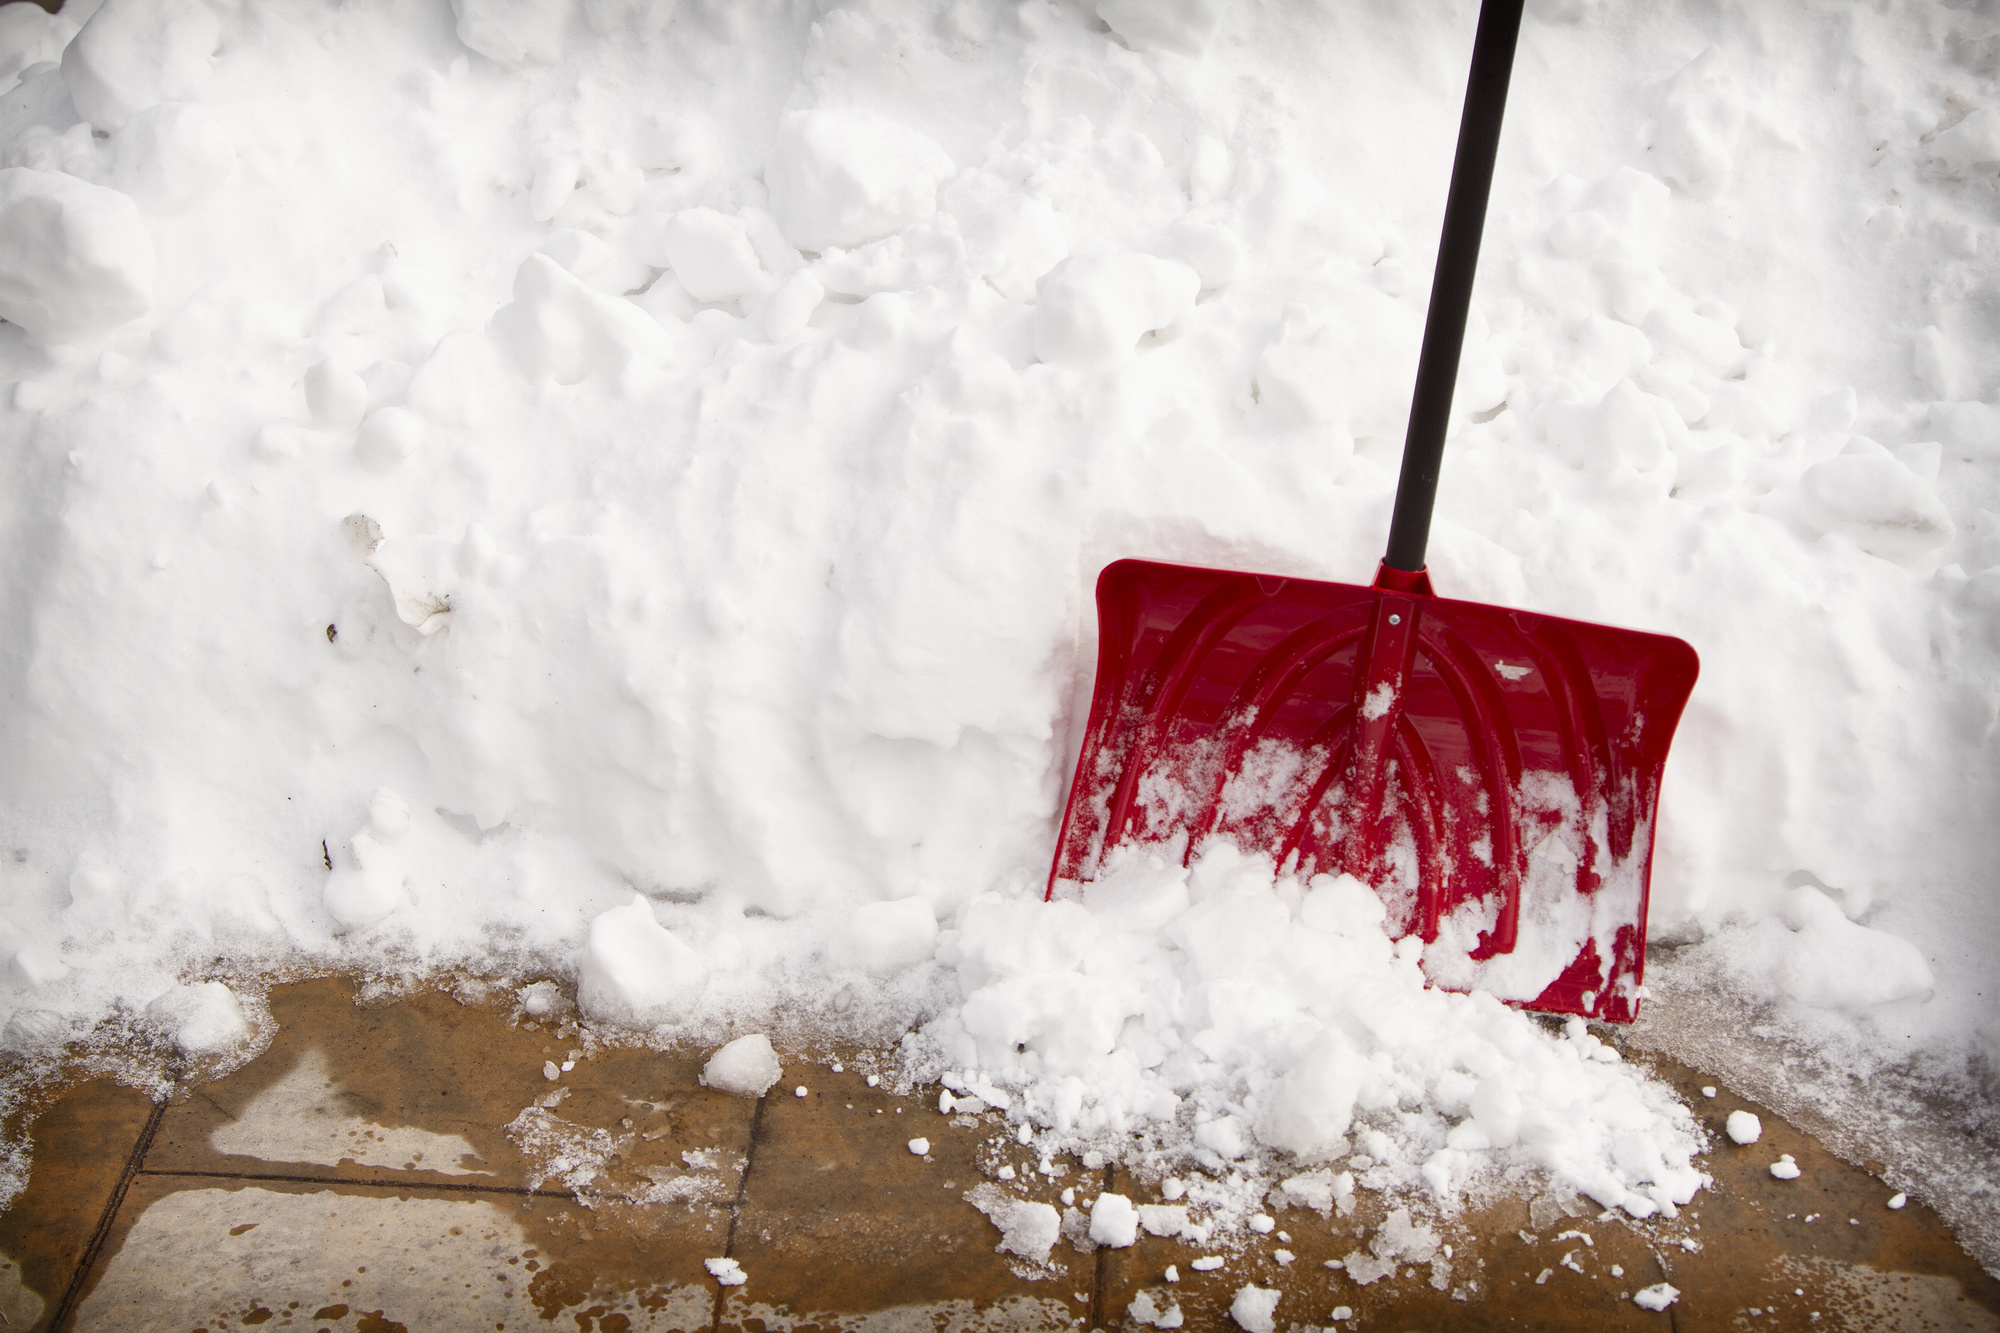 How should you prepare your parking lots and sidewalks for snow?